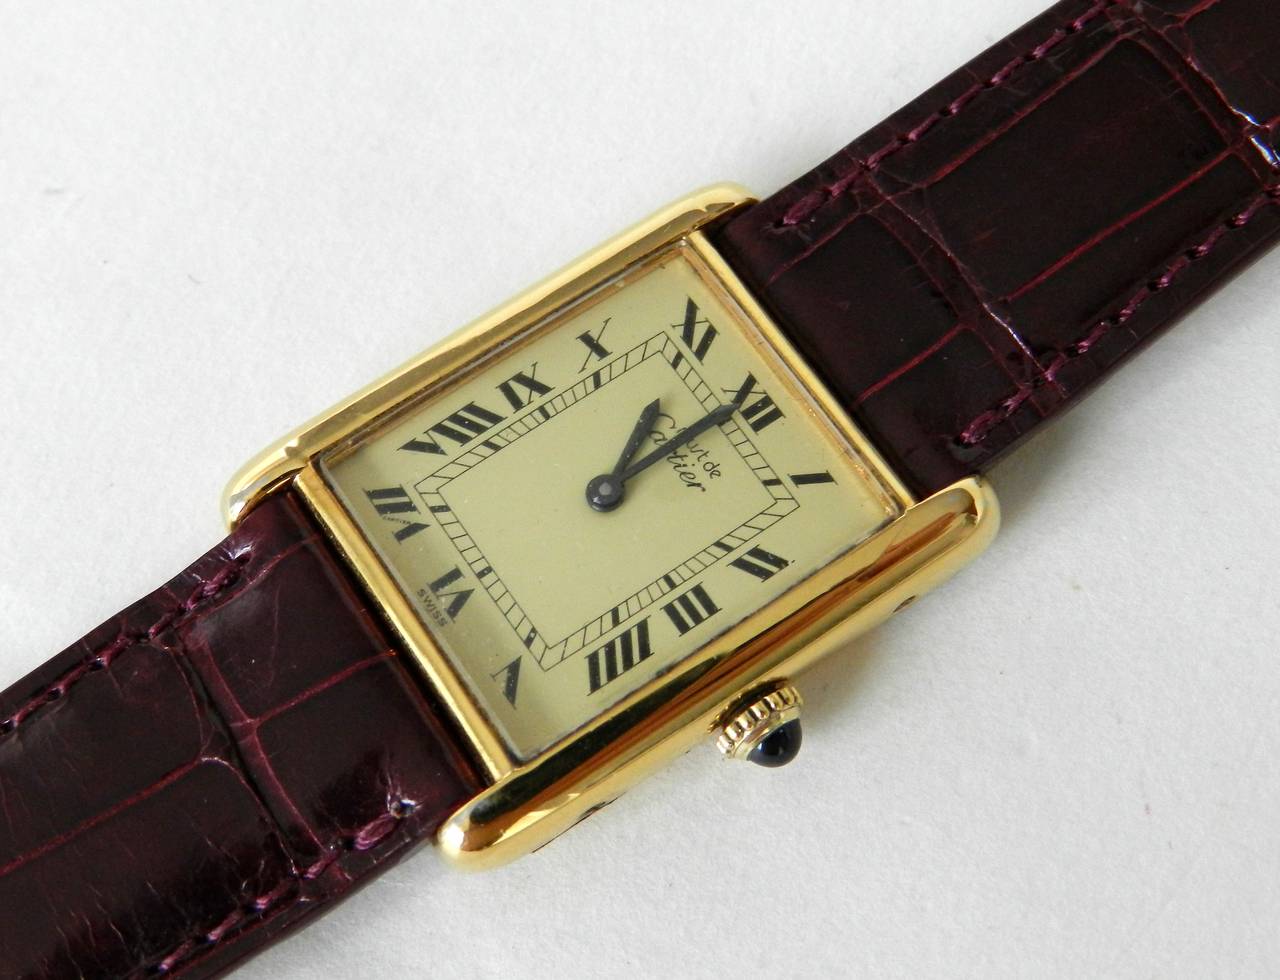 Cartier Vintage Tank Watch with Alligator Strap at 1stdibs